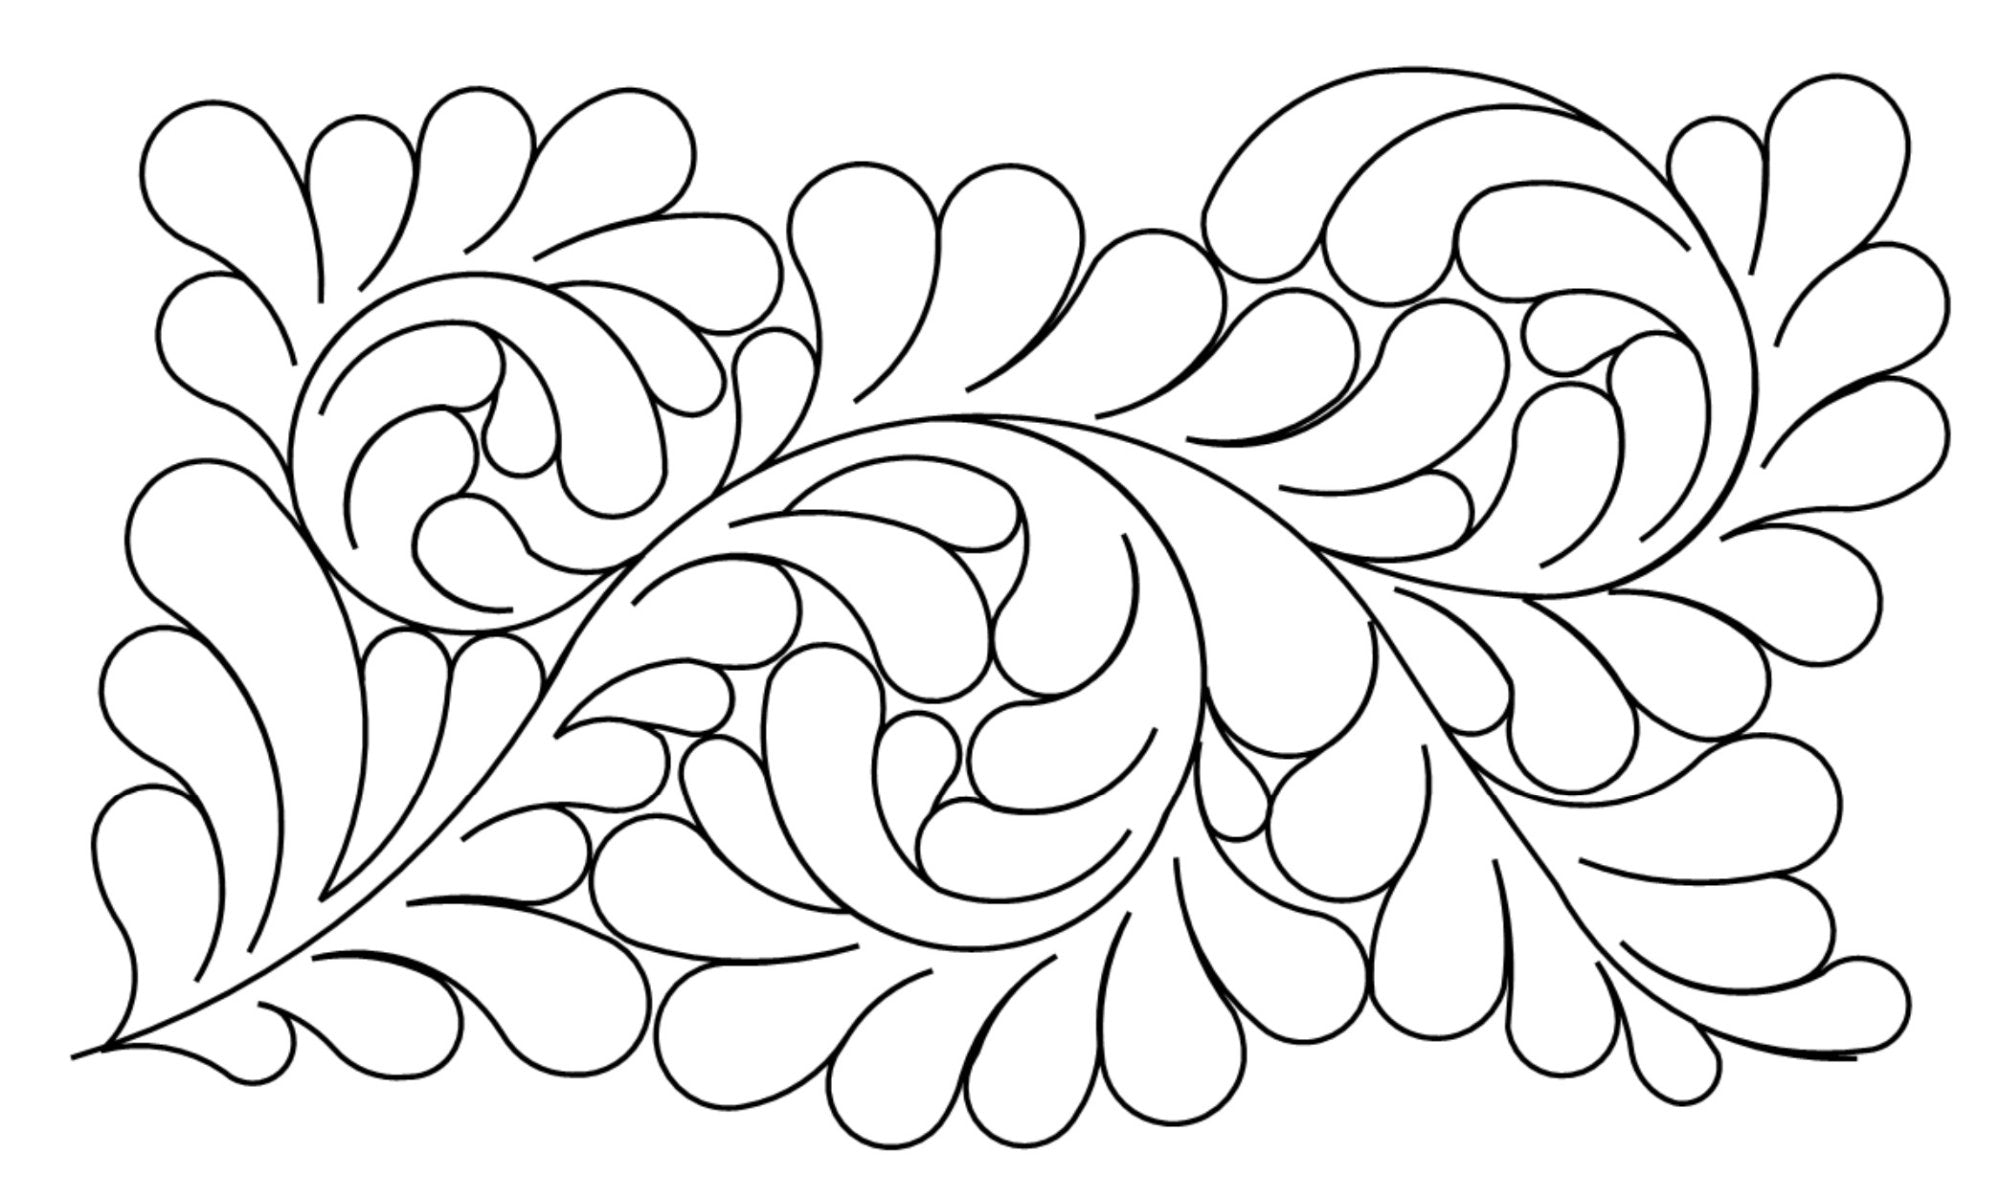 Full Feathers Digital E2E Wildflower Quilting Pantograph Close Up